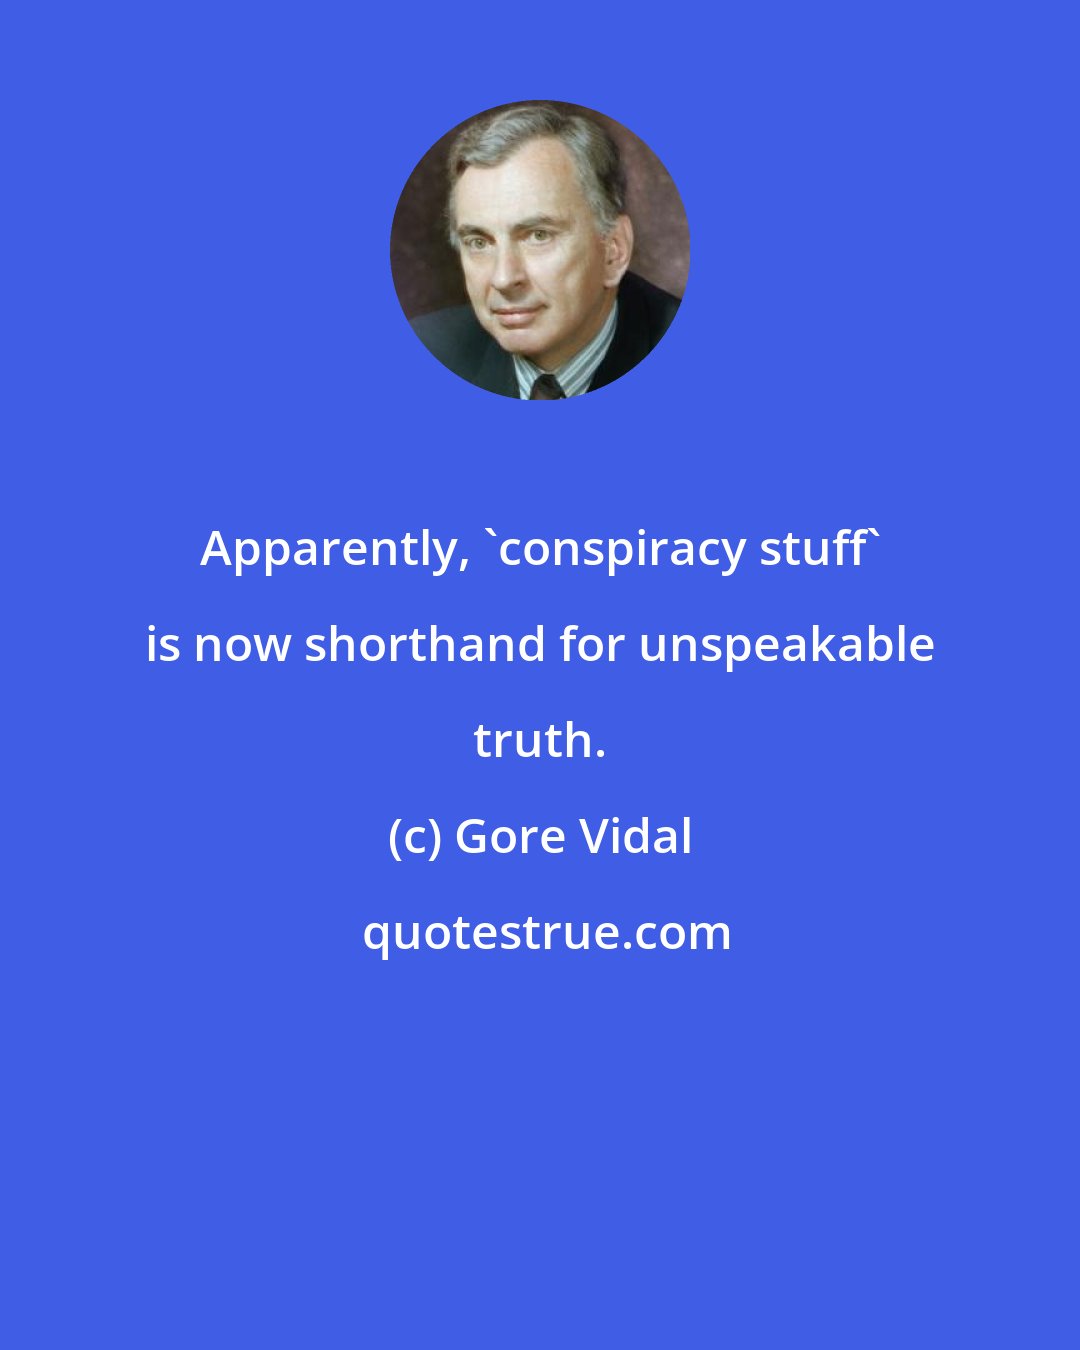 Gore Vidal: Apparently, 'conspiracy stuff' is now shorthand for unspeakable truth.